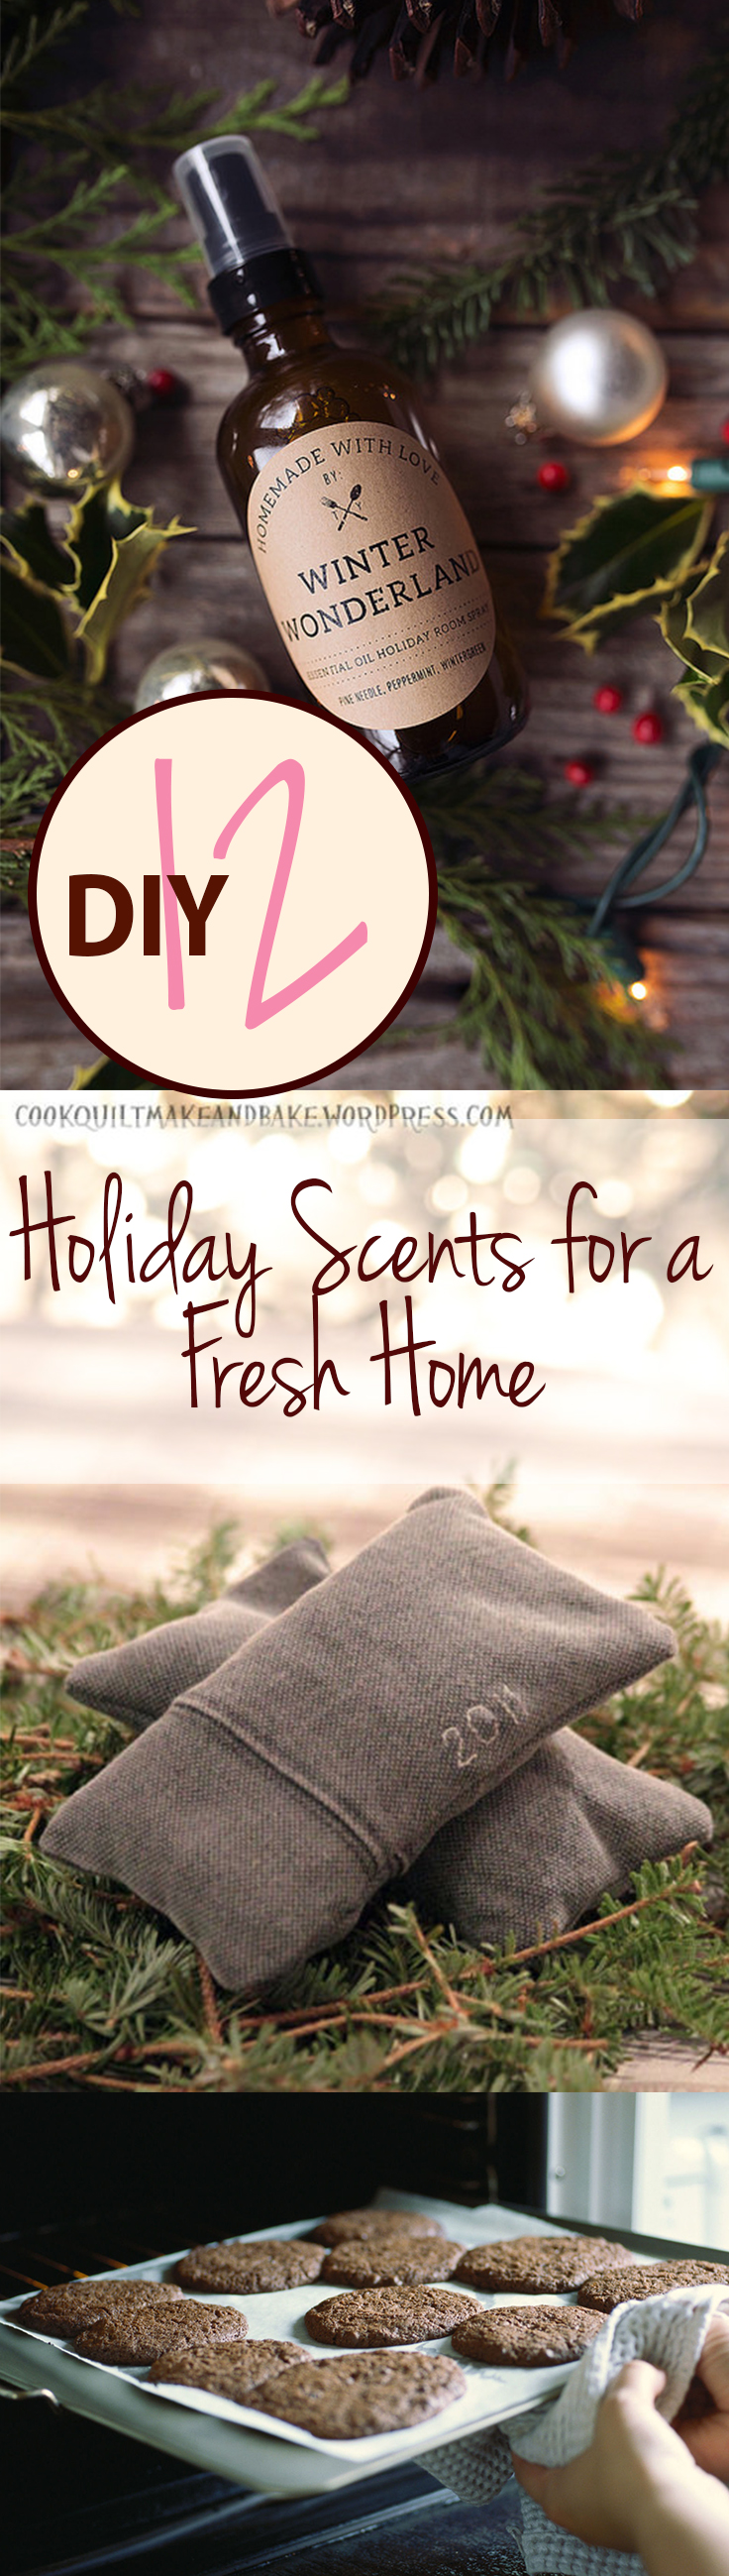 Holiday Scent Hacks, Home Scent TIps, How to Make Your Home Smell Good, Fresh Home, Stinky Home Hacks, Popular Pin, Cleaning, How to Clean Your Home